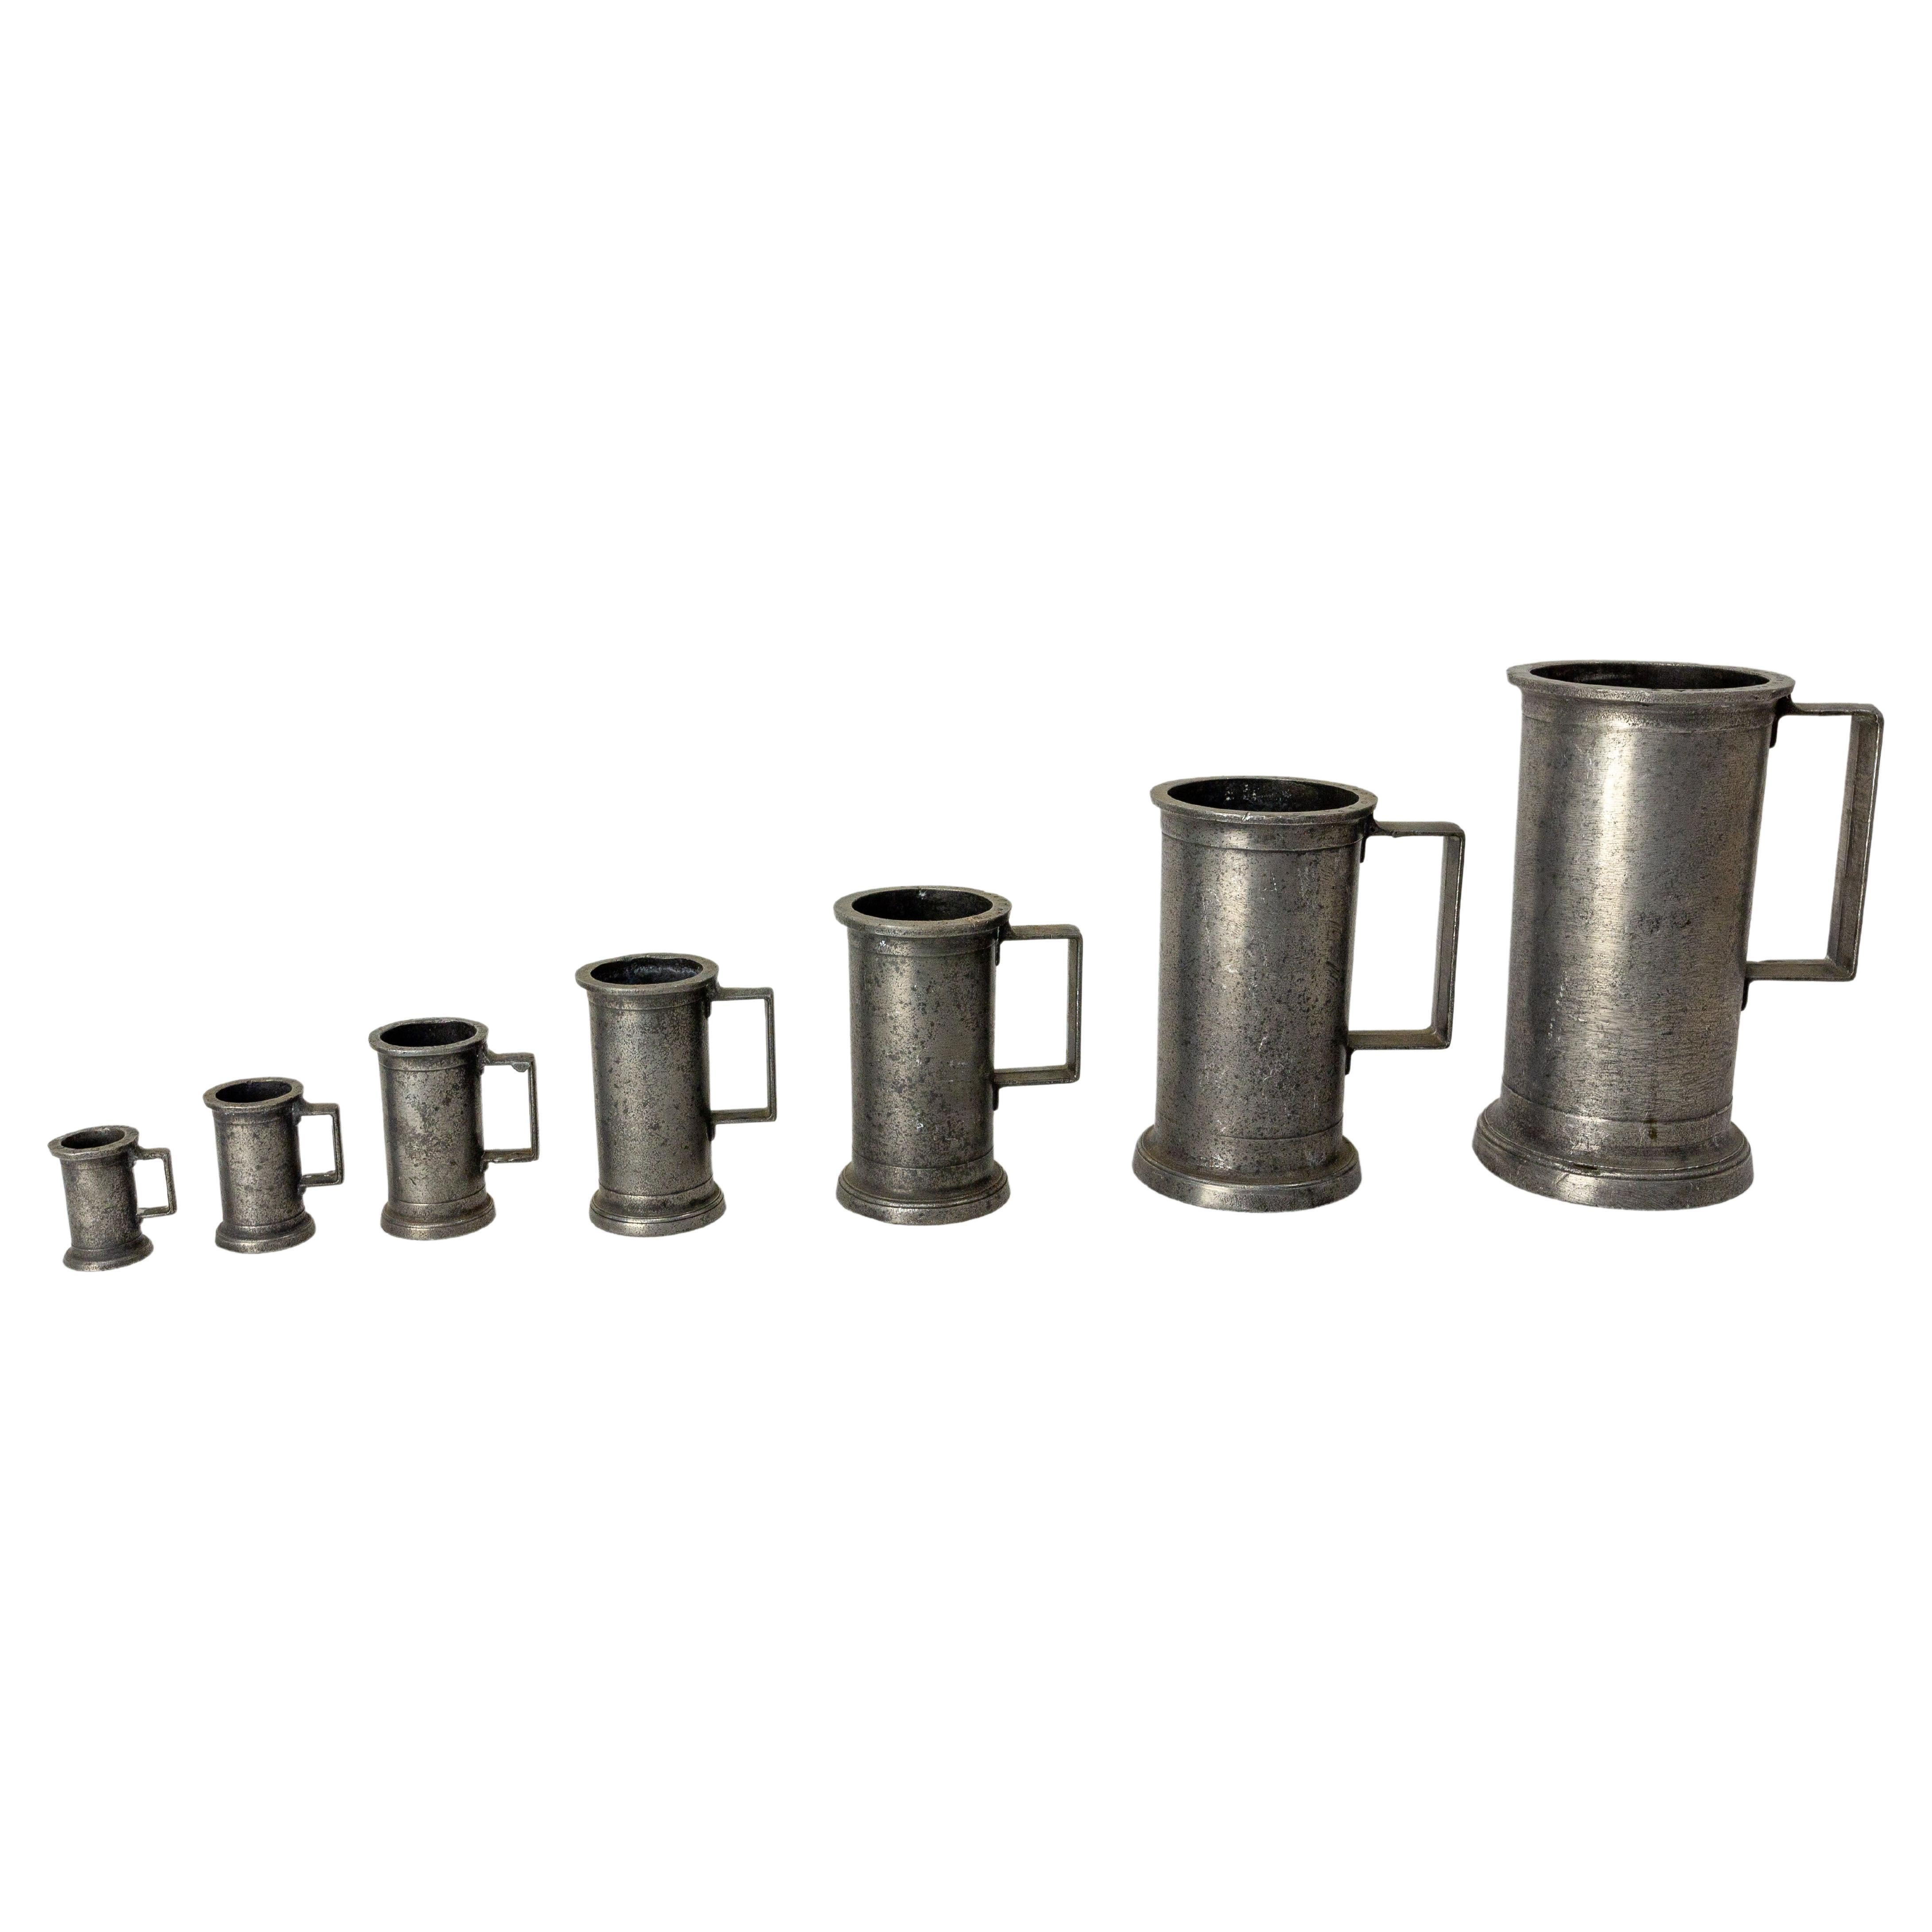 Series of Measuring Tins, Trade Equipment, France, 19th Century For Sale